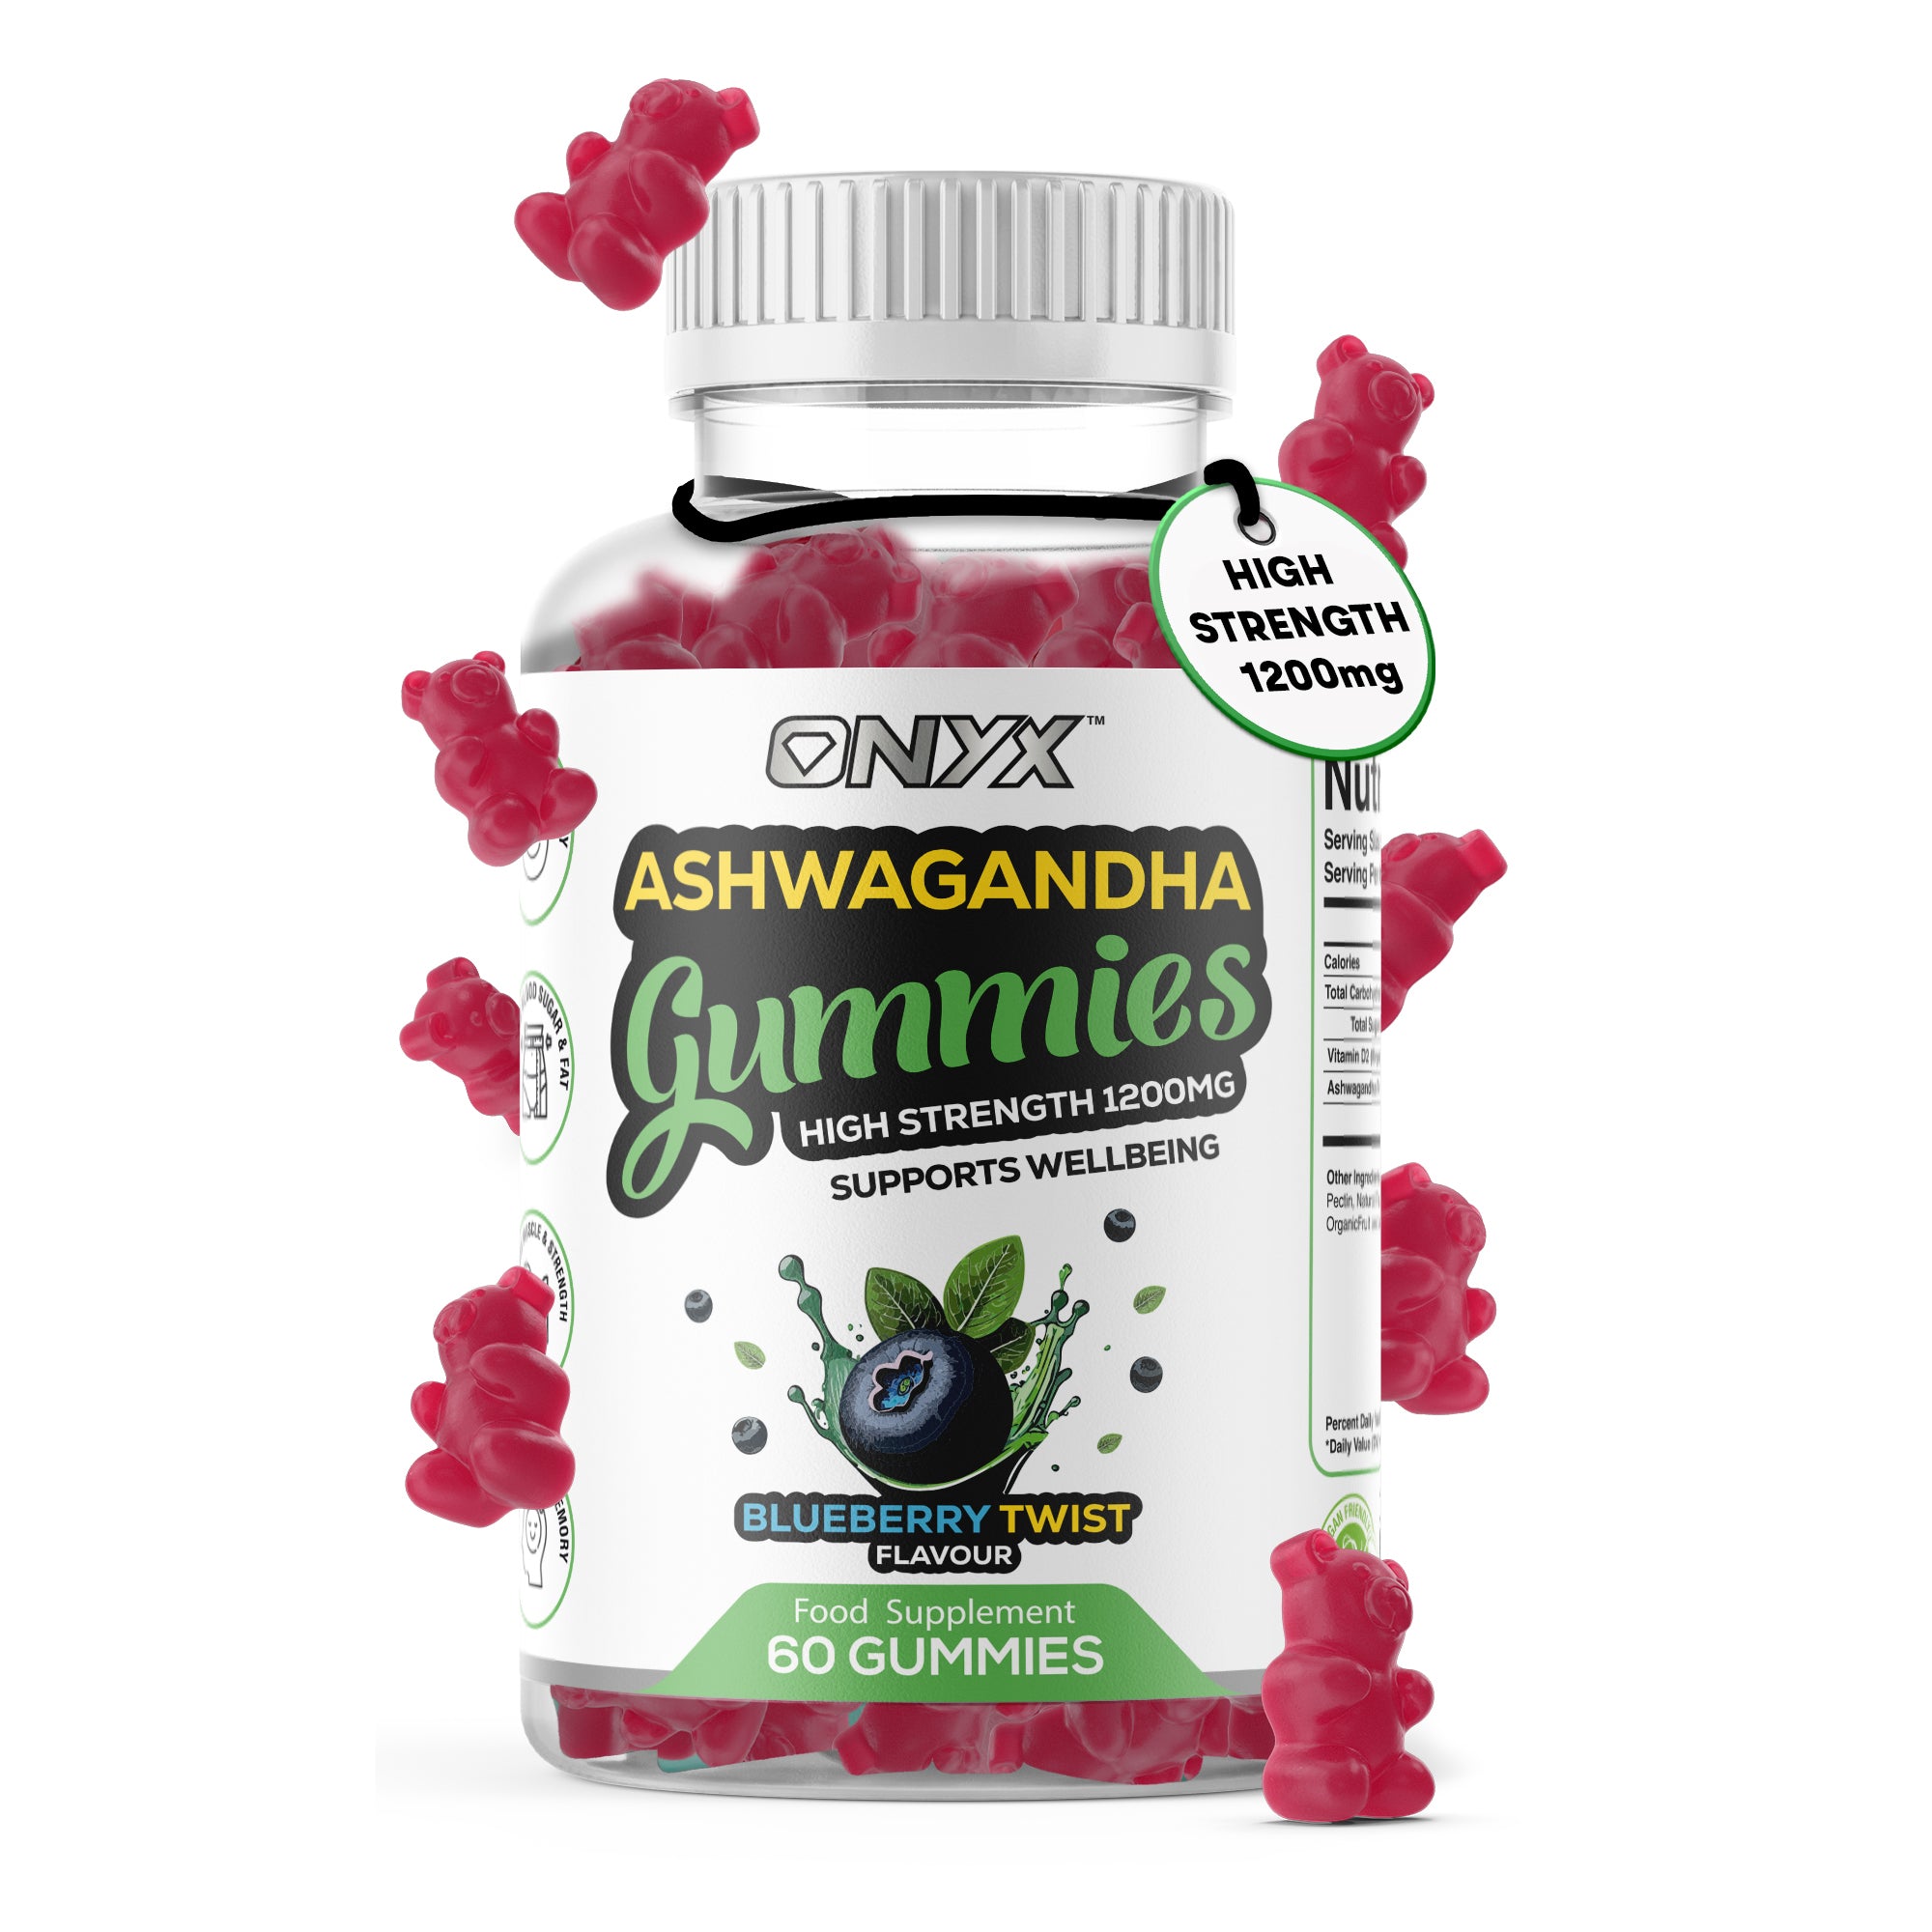 Ashwagandha Gummies - High Strength 1200mg - Supports Well-being